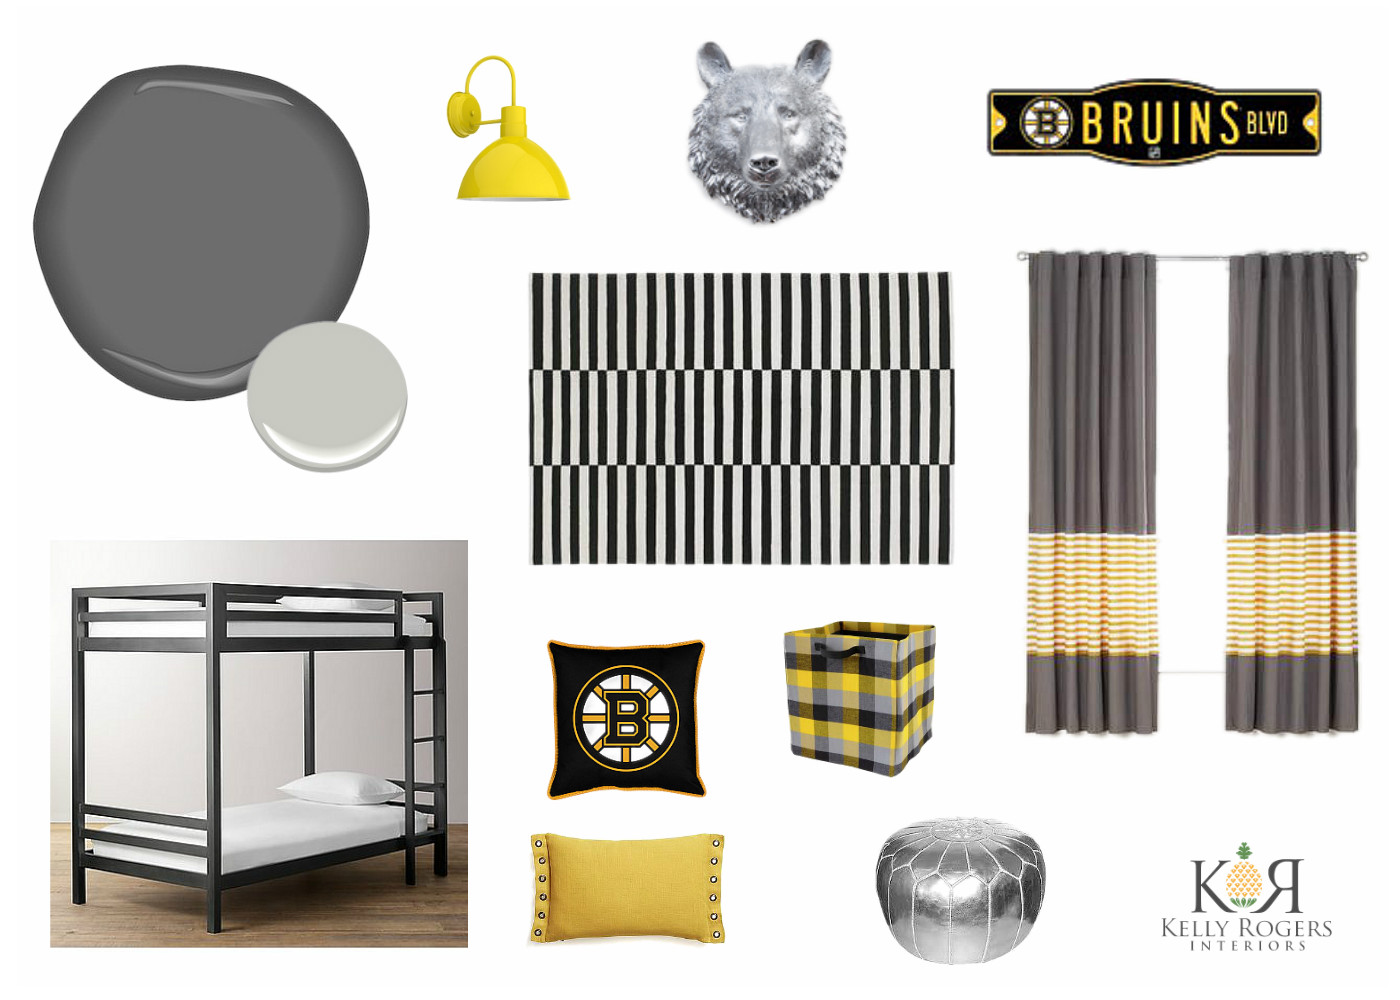 A Bruins Bedroom | Kelly Rogers Interiors | Interiors for Families